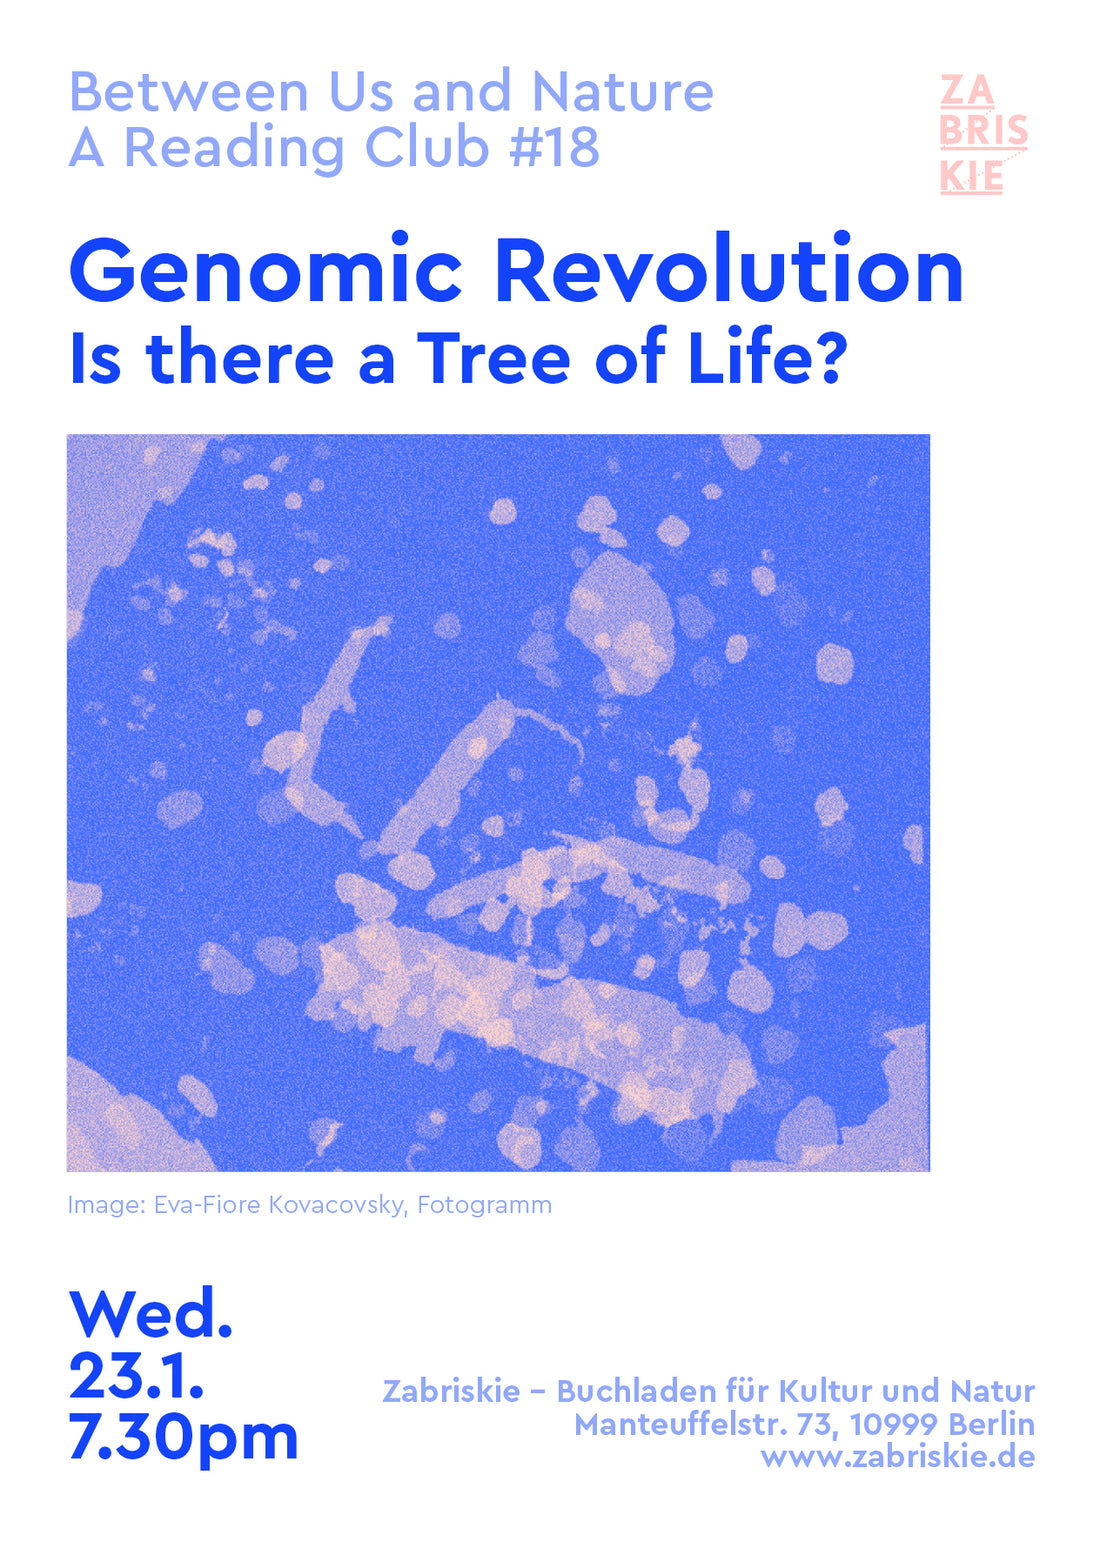 Between Us and Nature – A Reading Club #18: „Genomic Revolution - Is there a Tree of Life?“